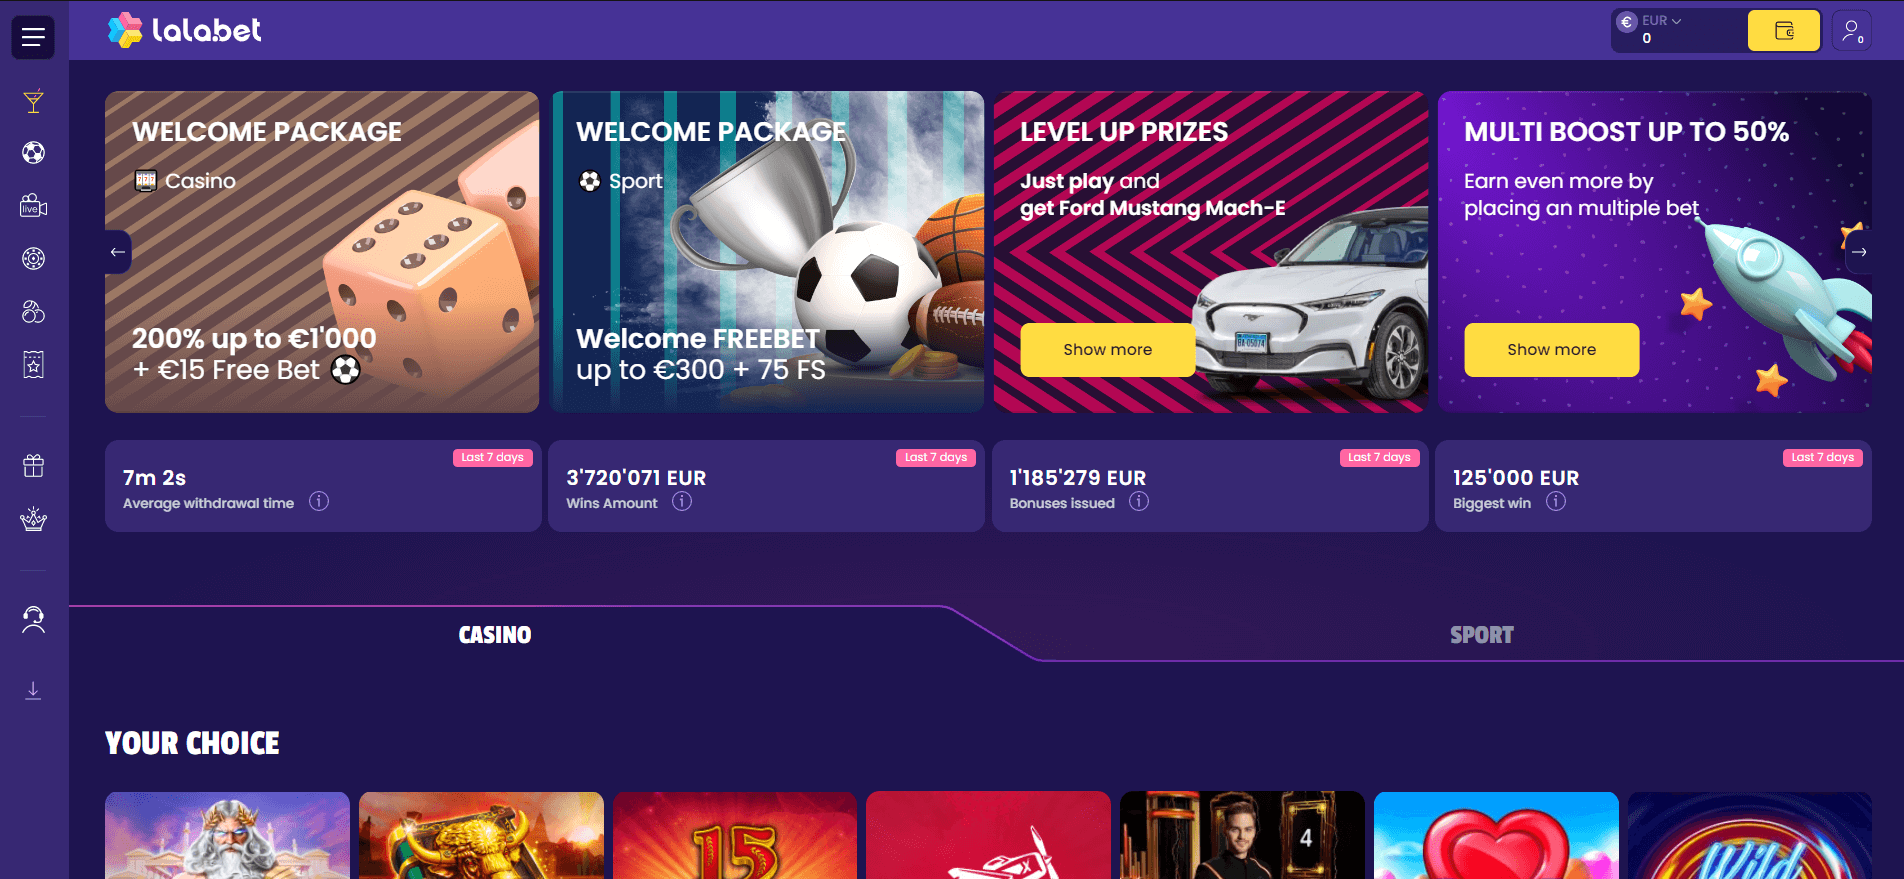 LalaBet Casino home page